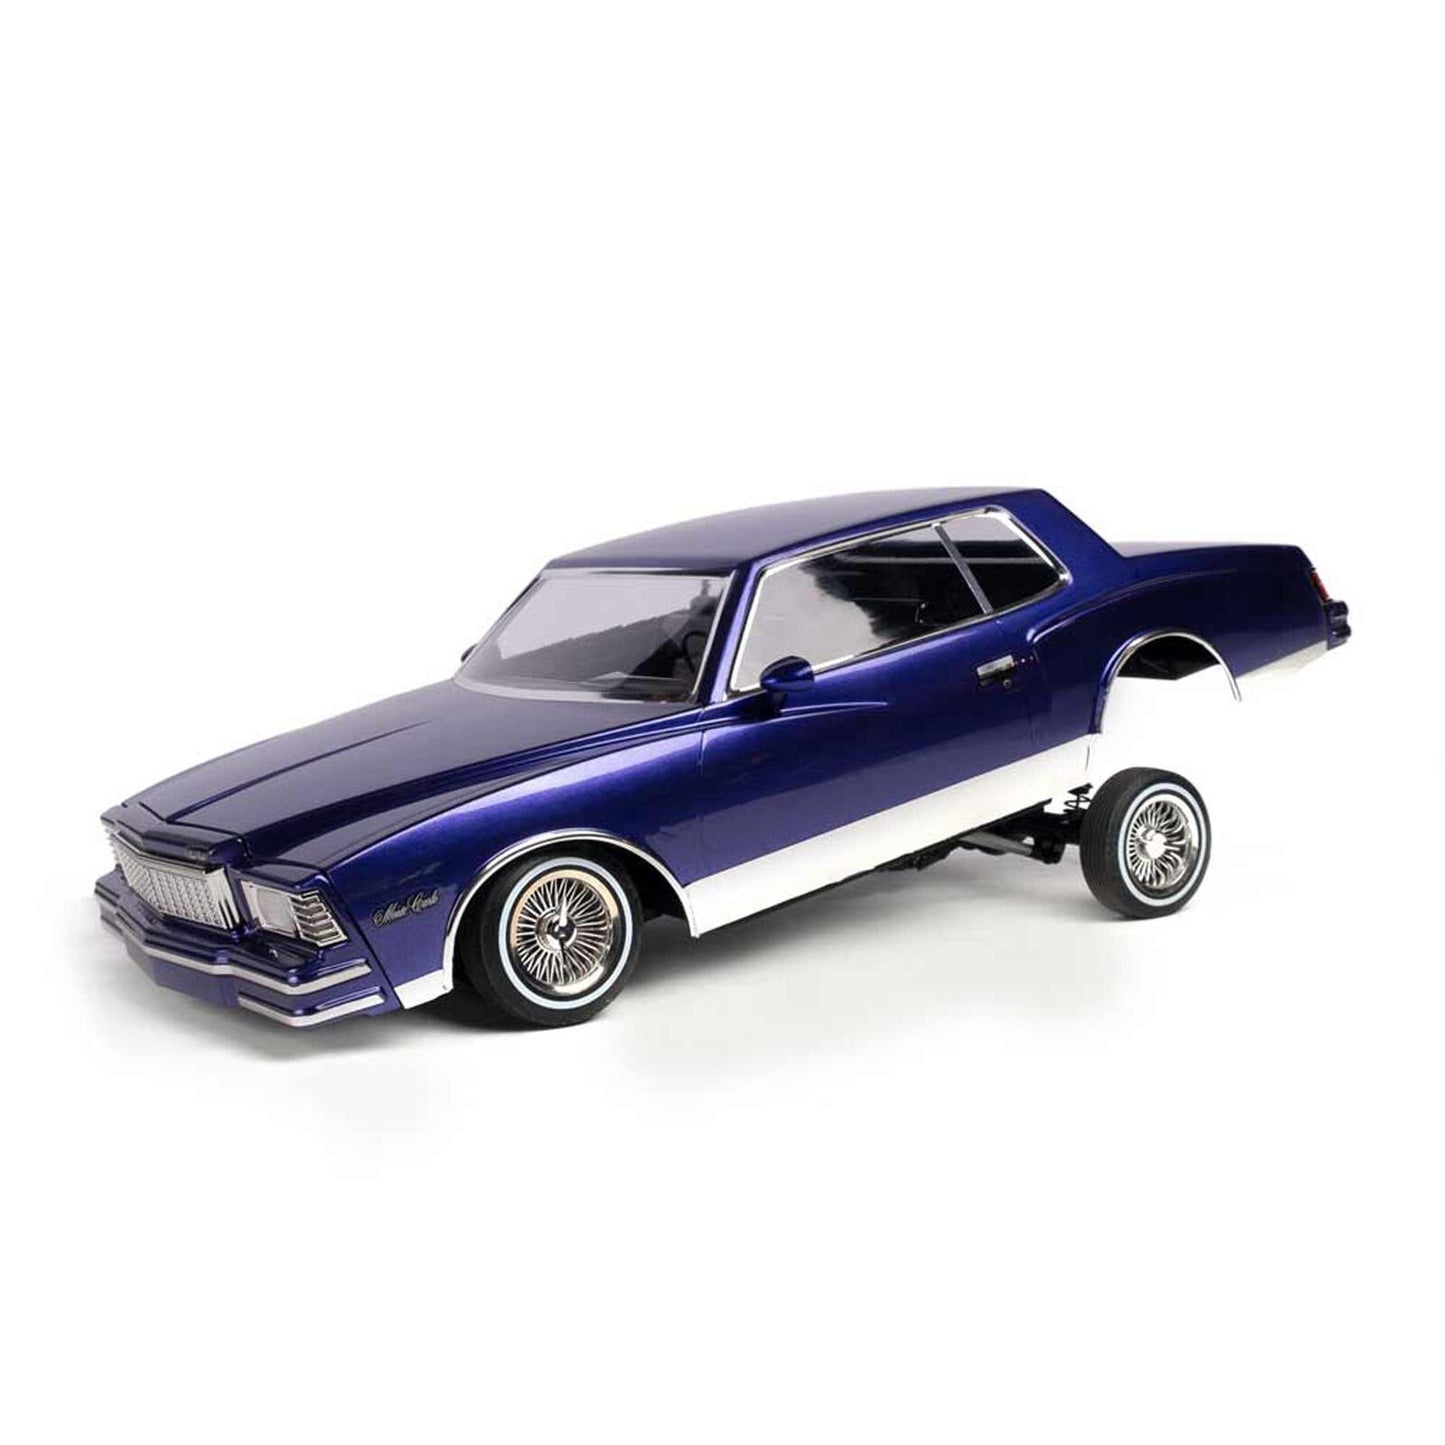 Red Cat 1/10 1979 Chevrolet Monte Carlo Brushed 2WD Lowrider RTR, Purple